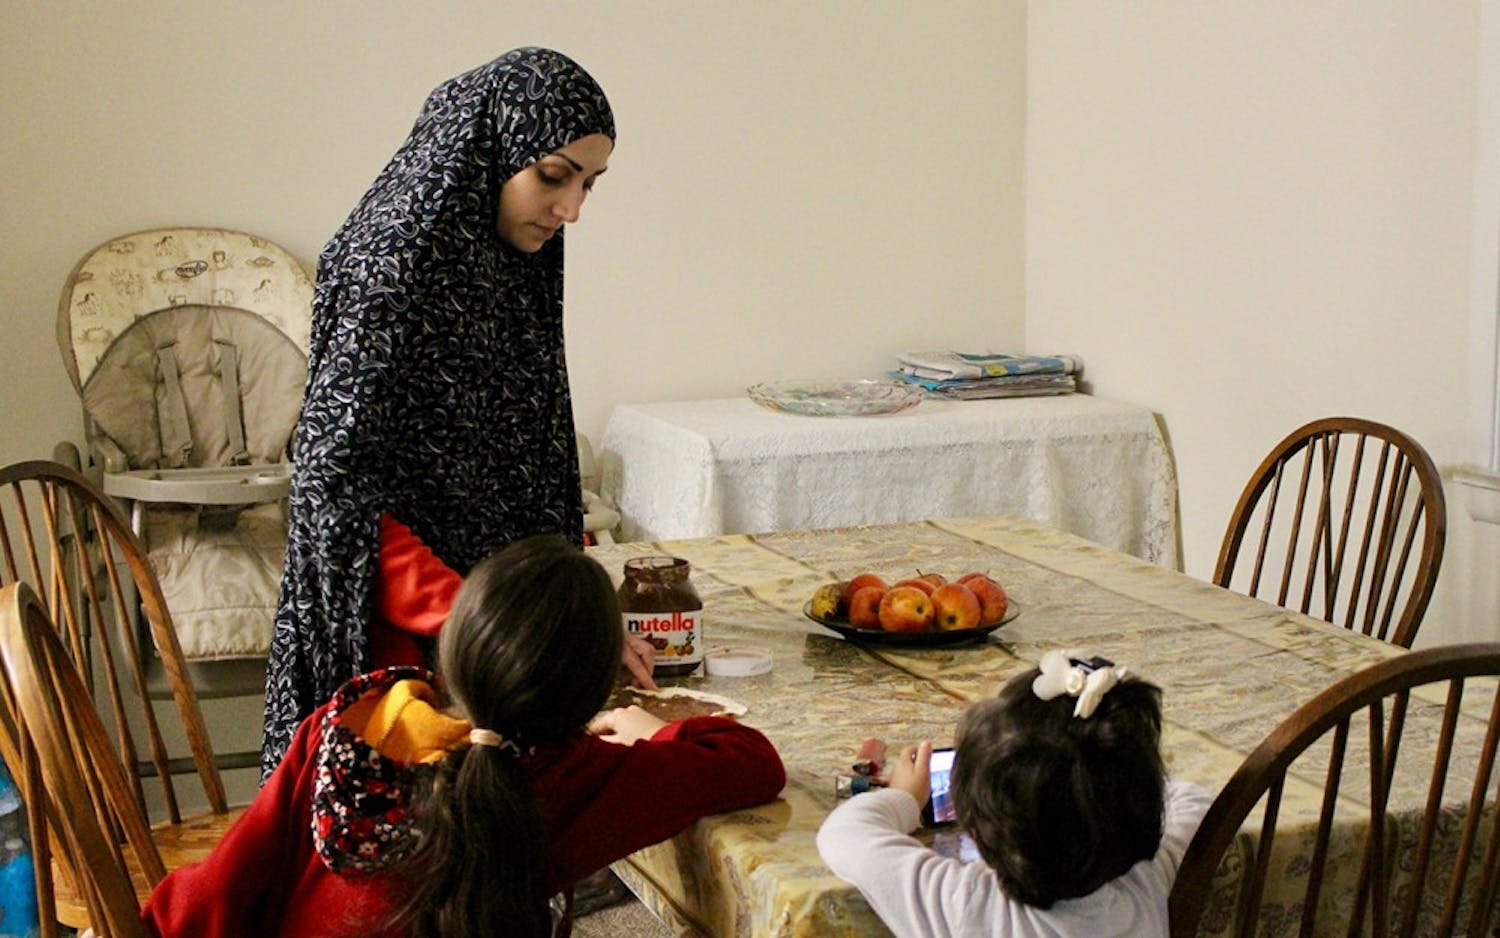 Duha Lababidi fixes her daughter Sara, 7, an afternoon snack. The Lababidi family has been living&nbsp;in Indianapolis since December after being resettled from Syria by way of Jordan.&nbsp;